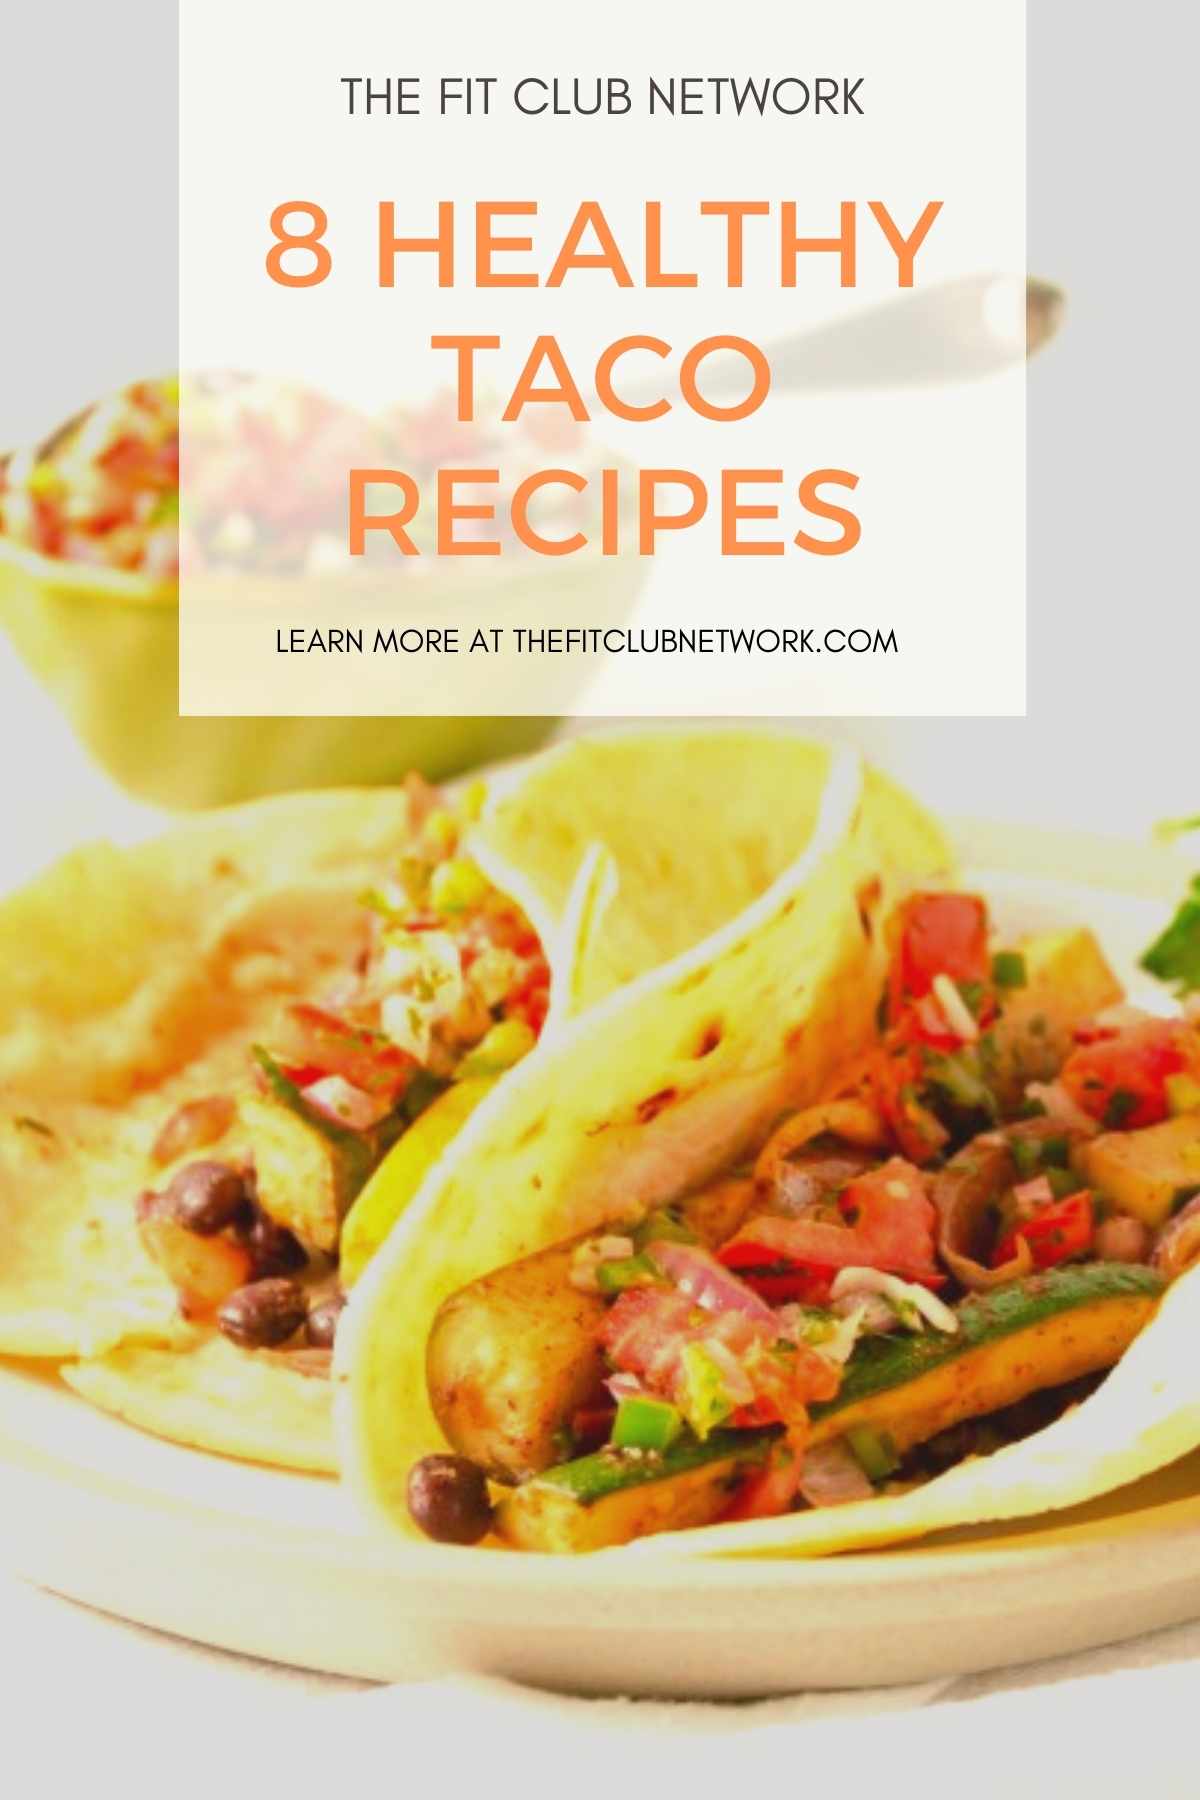 8 Healthy Taco Recipes & Buffet Style Meal Prep